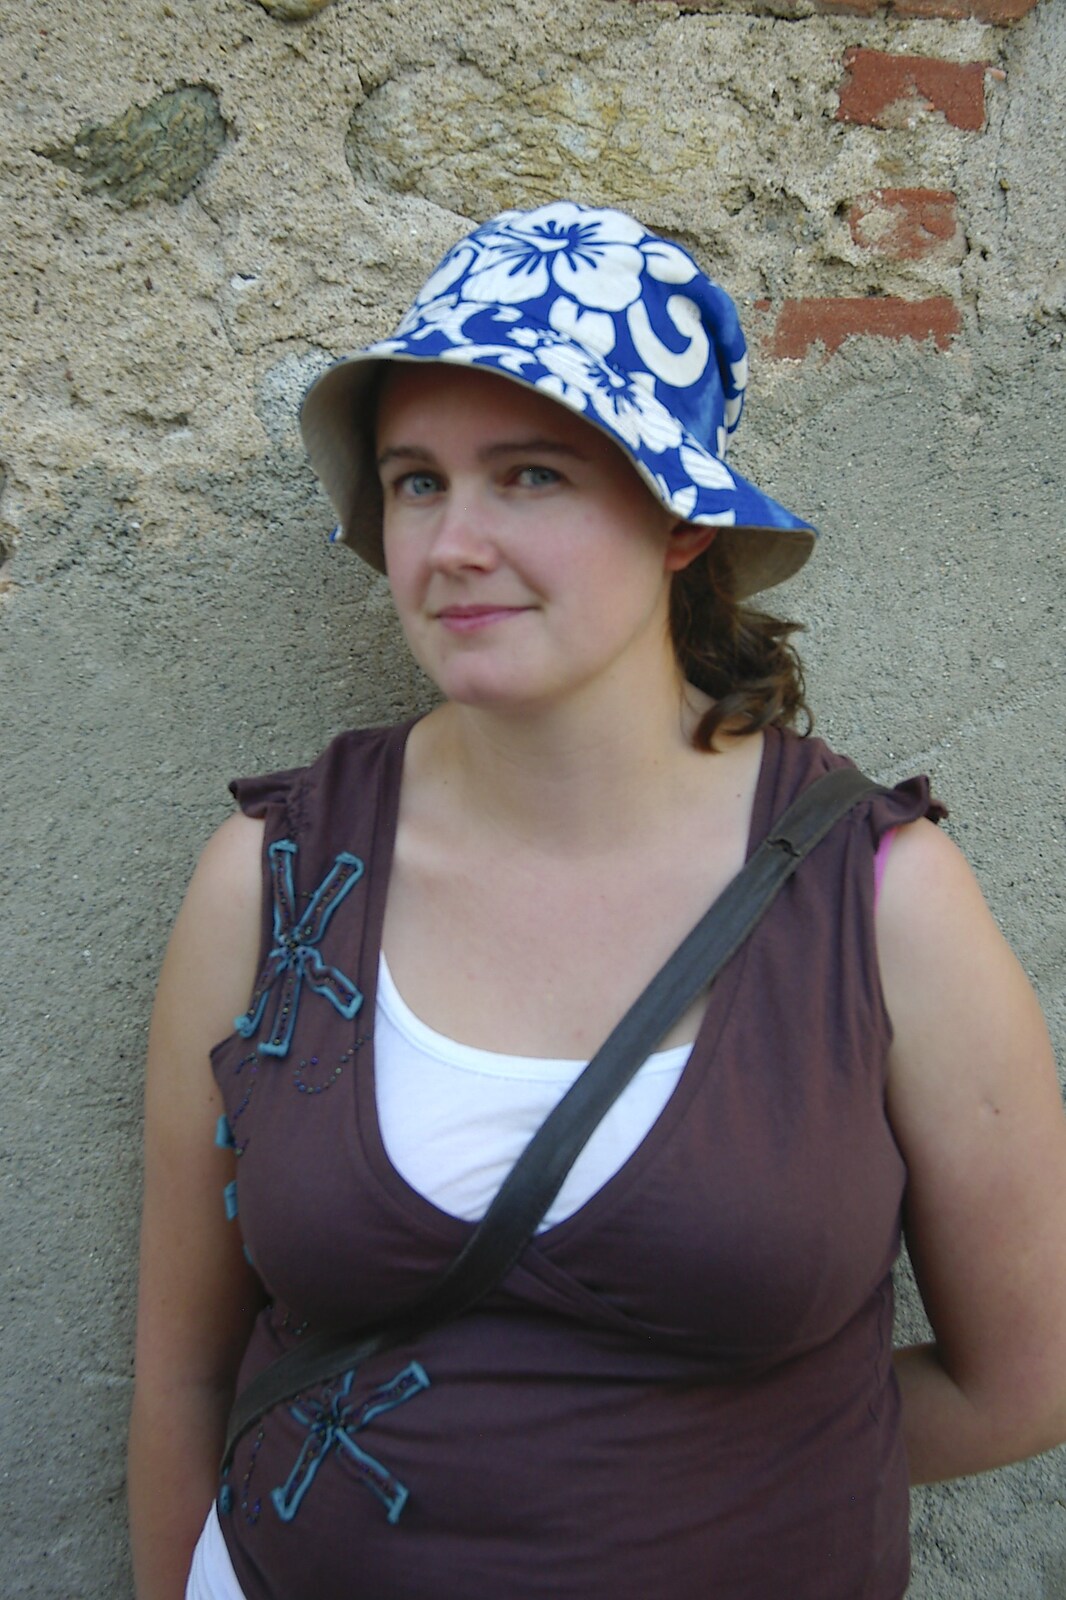 Isobel with a hat from Grape Picking and Pressing, Roussillon, France - 19th September 2006